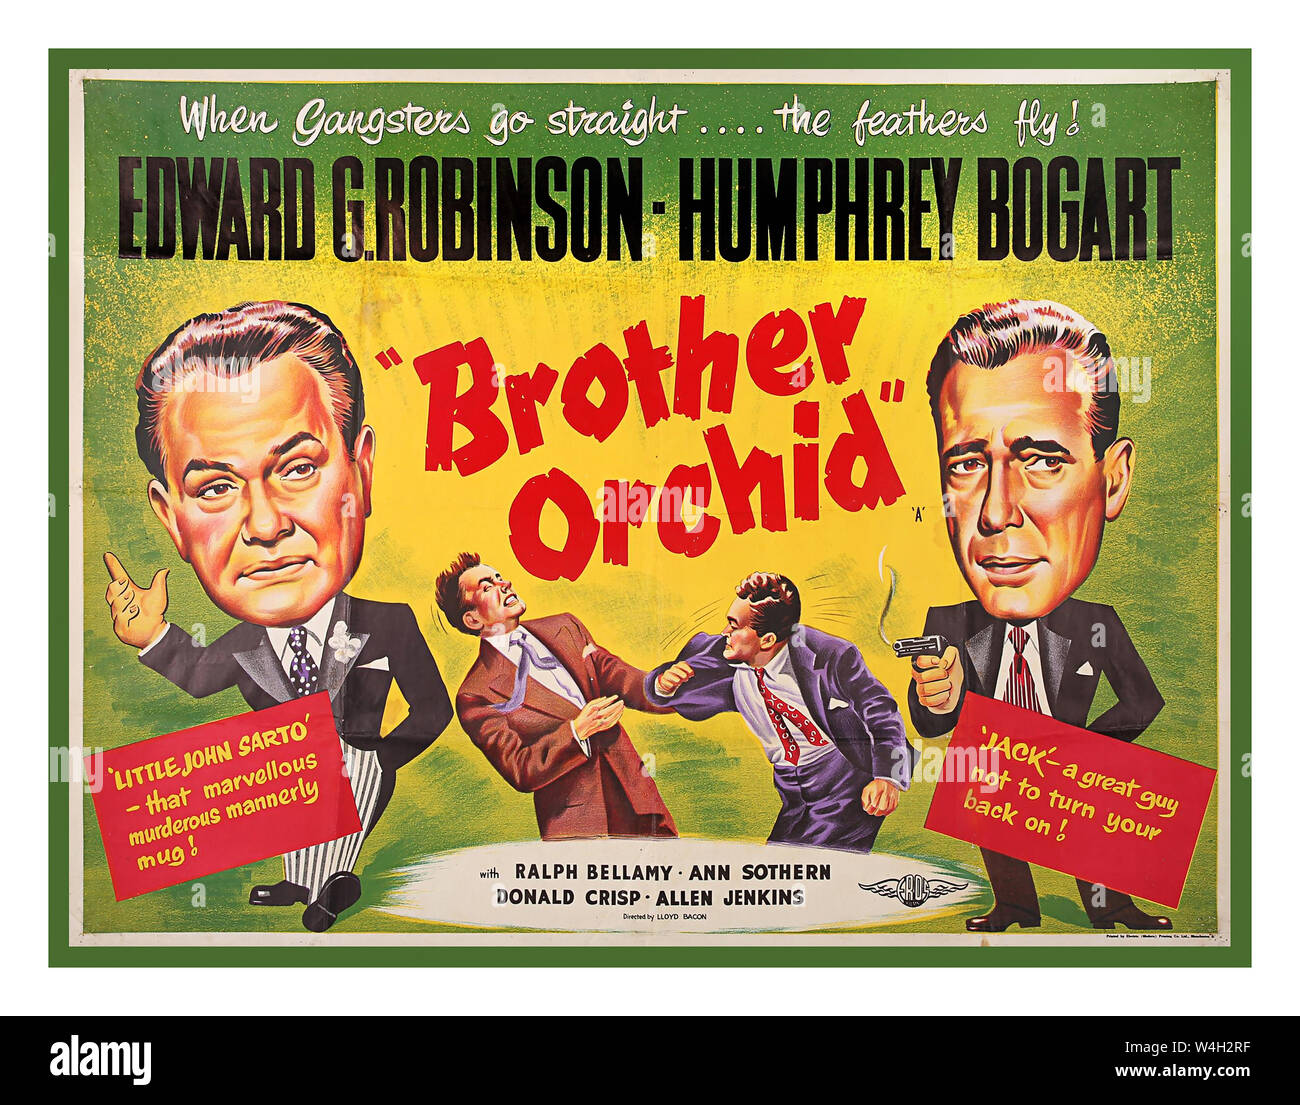 Vintage 1940's UK film Movie Cinema Poster for the American film 'Brother Orchid'  Full colour illustration for this 1940 film. The poster presents caricature representations of Edward G. Robinson and Humphrey Bogart. Stock Photo